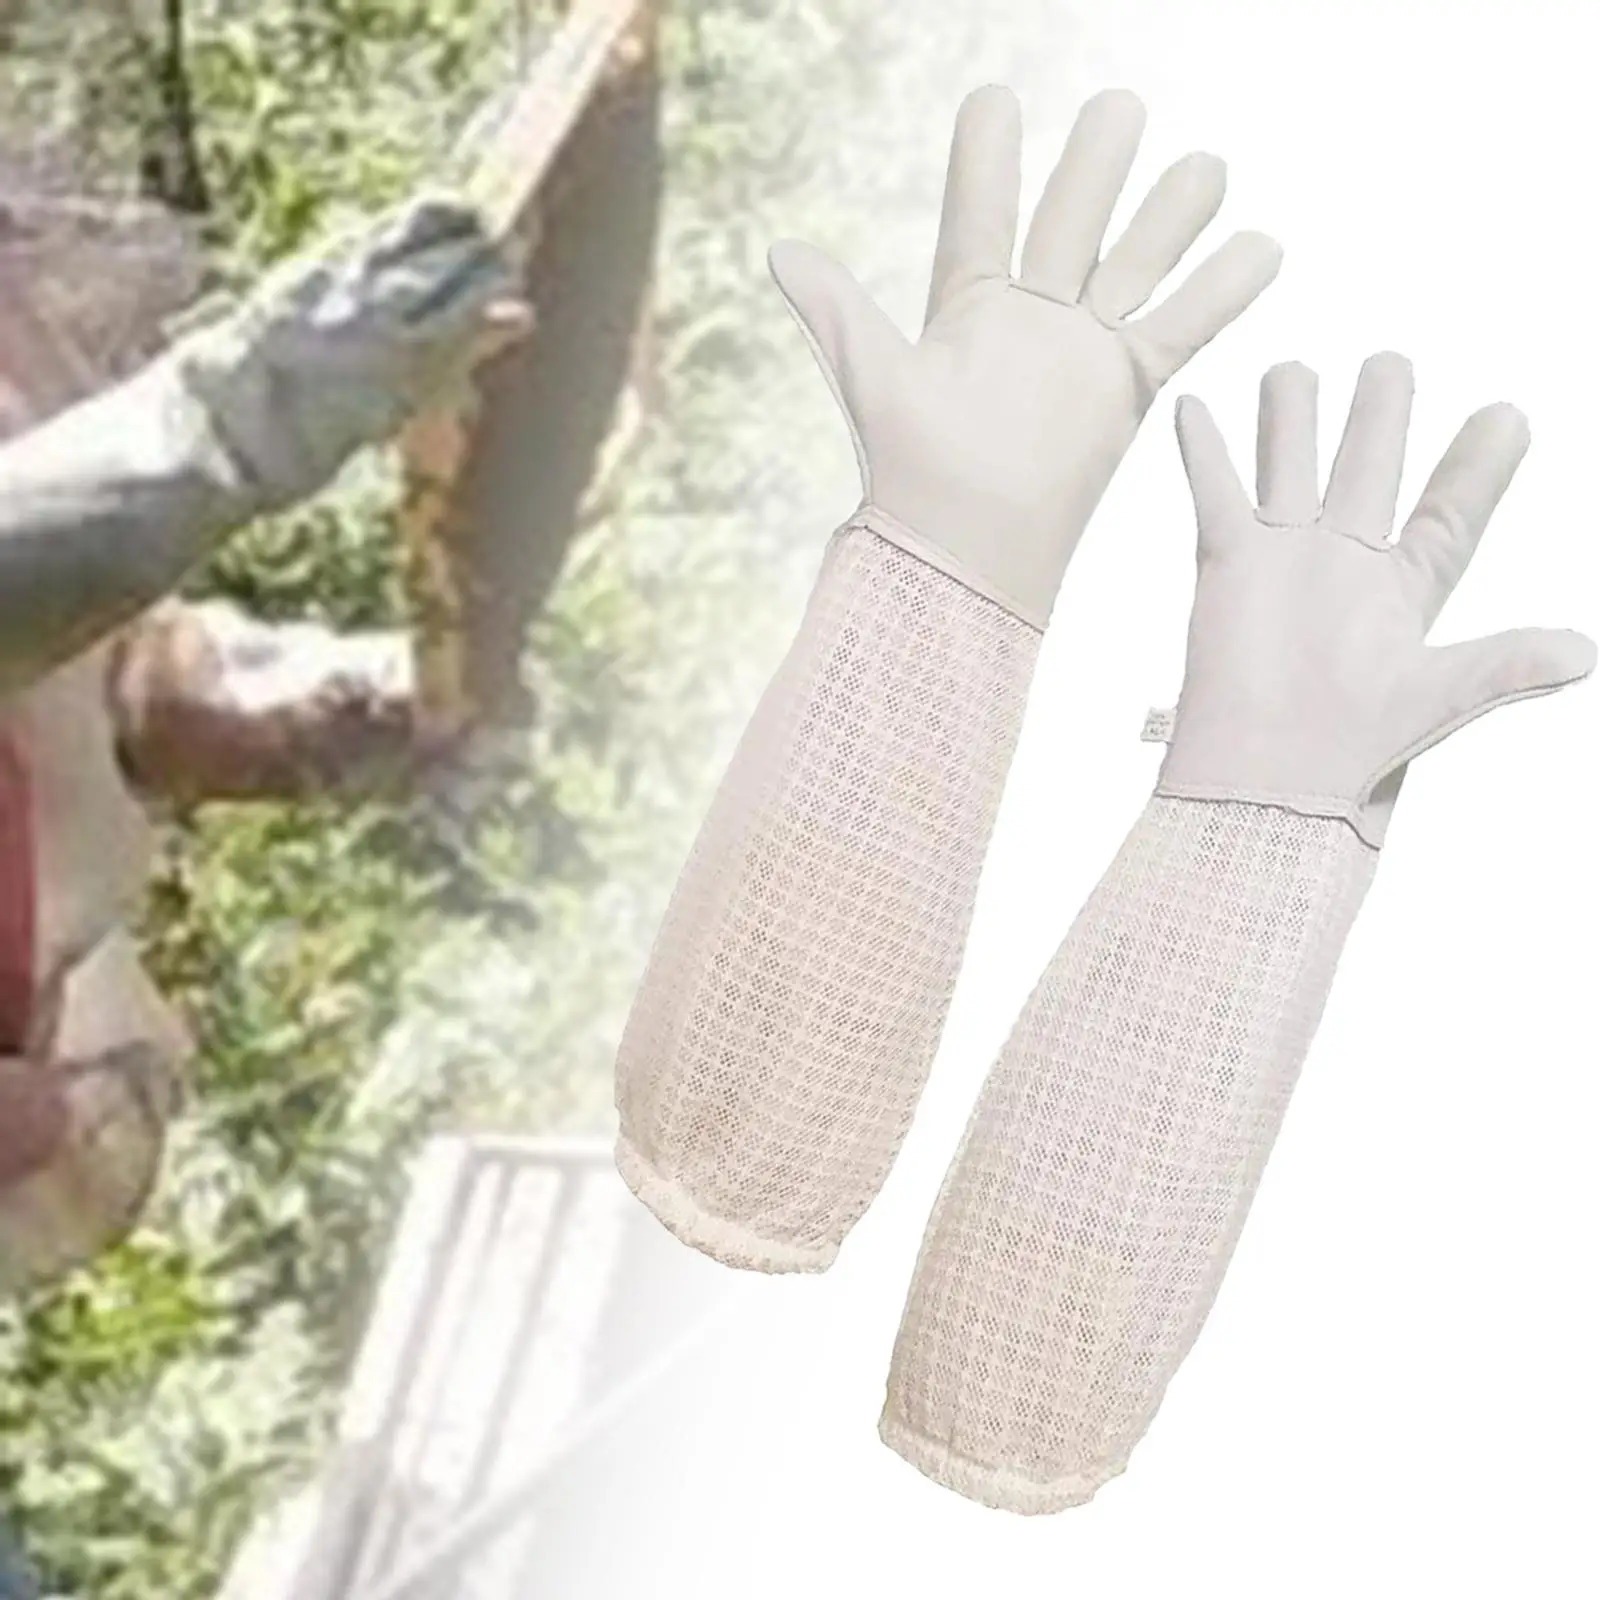 Anti Bee Gloves Beekeeping Gloves Protective Anti Pricks Beekeeping Tools Beekeeping Supplies Anti Sting for Unisex